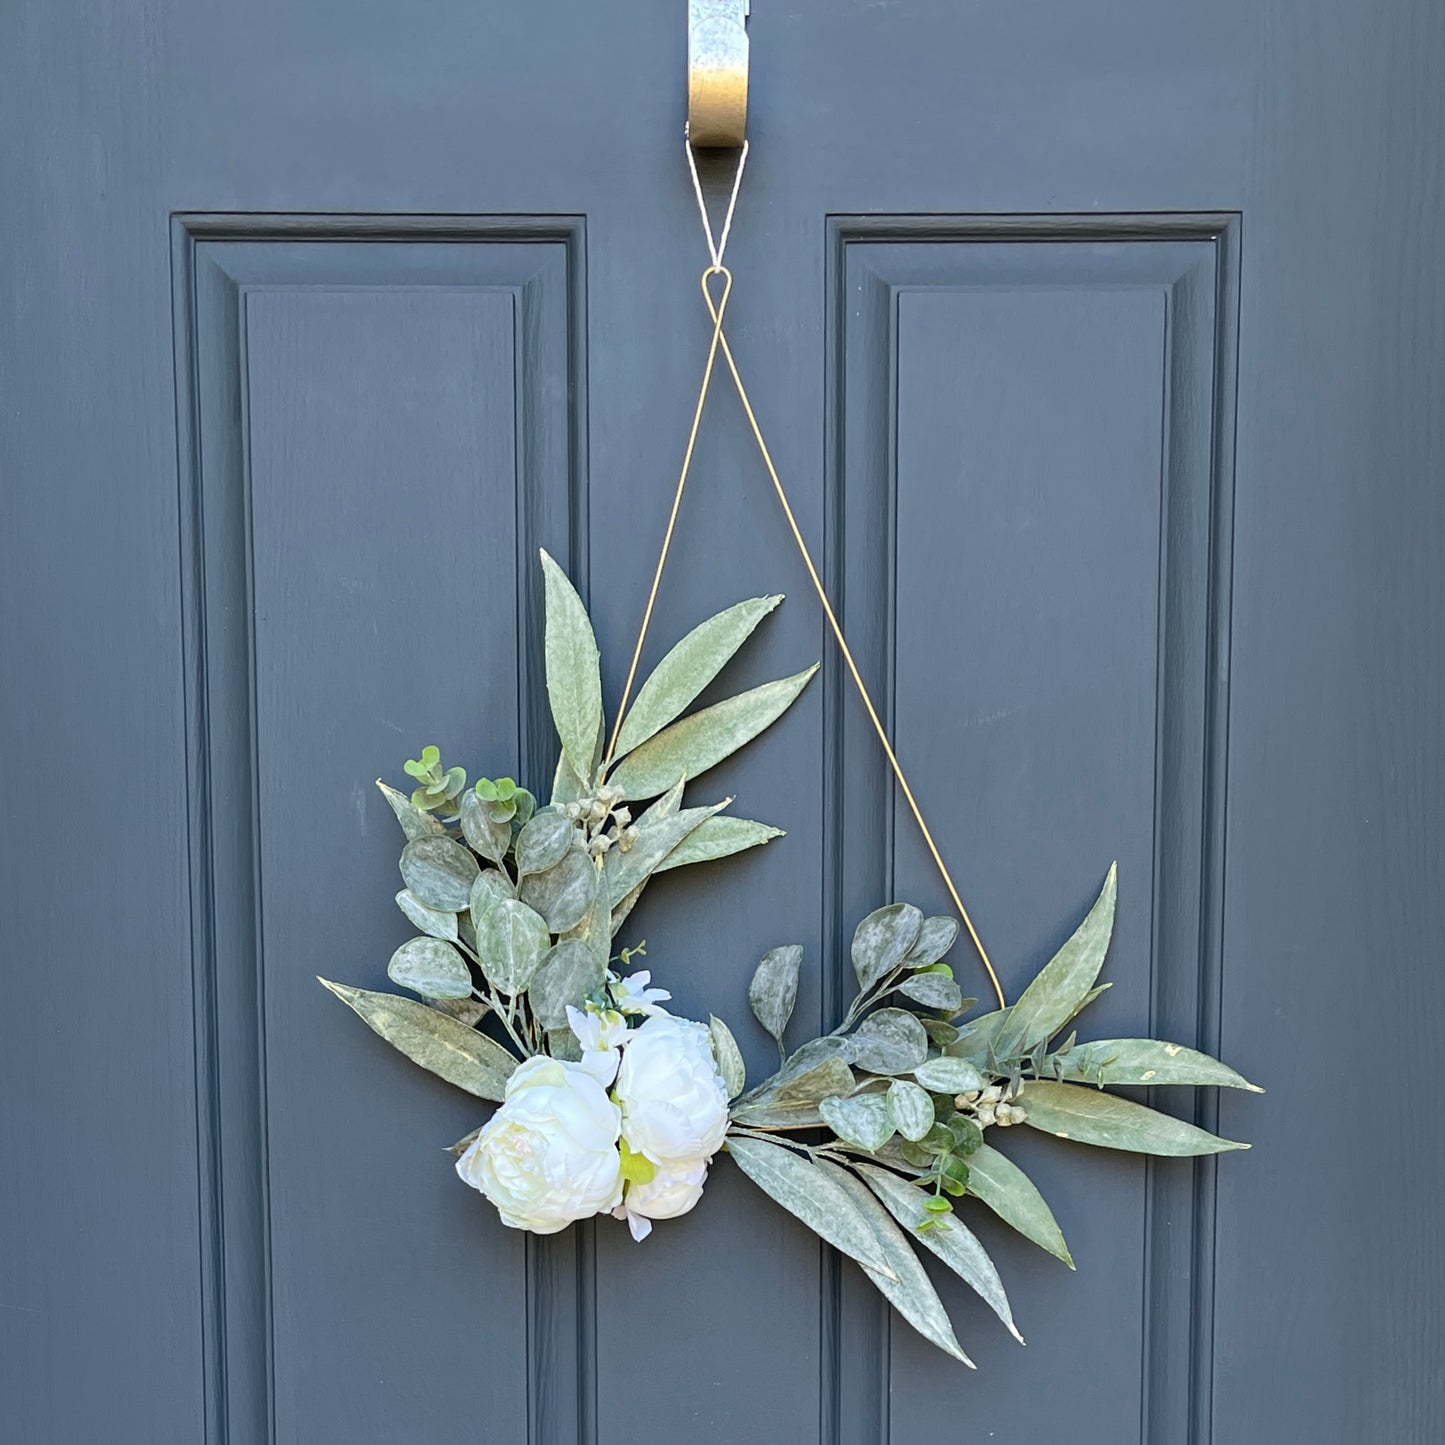 Matte gold, tear-drop shaped metal wreath base with eucalyptus greenery, boxwood greenery, and two white peony blooms and one white peony bud. Wreath has a cotton twine hanger. Wreath is hanging from a gold wreath hanger on a dark blue front door.